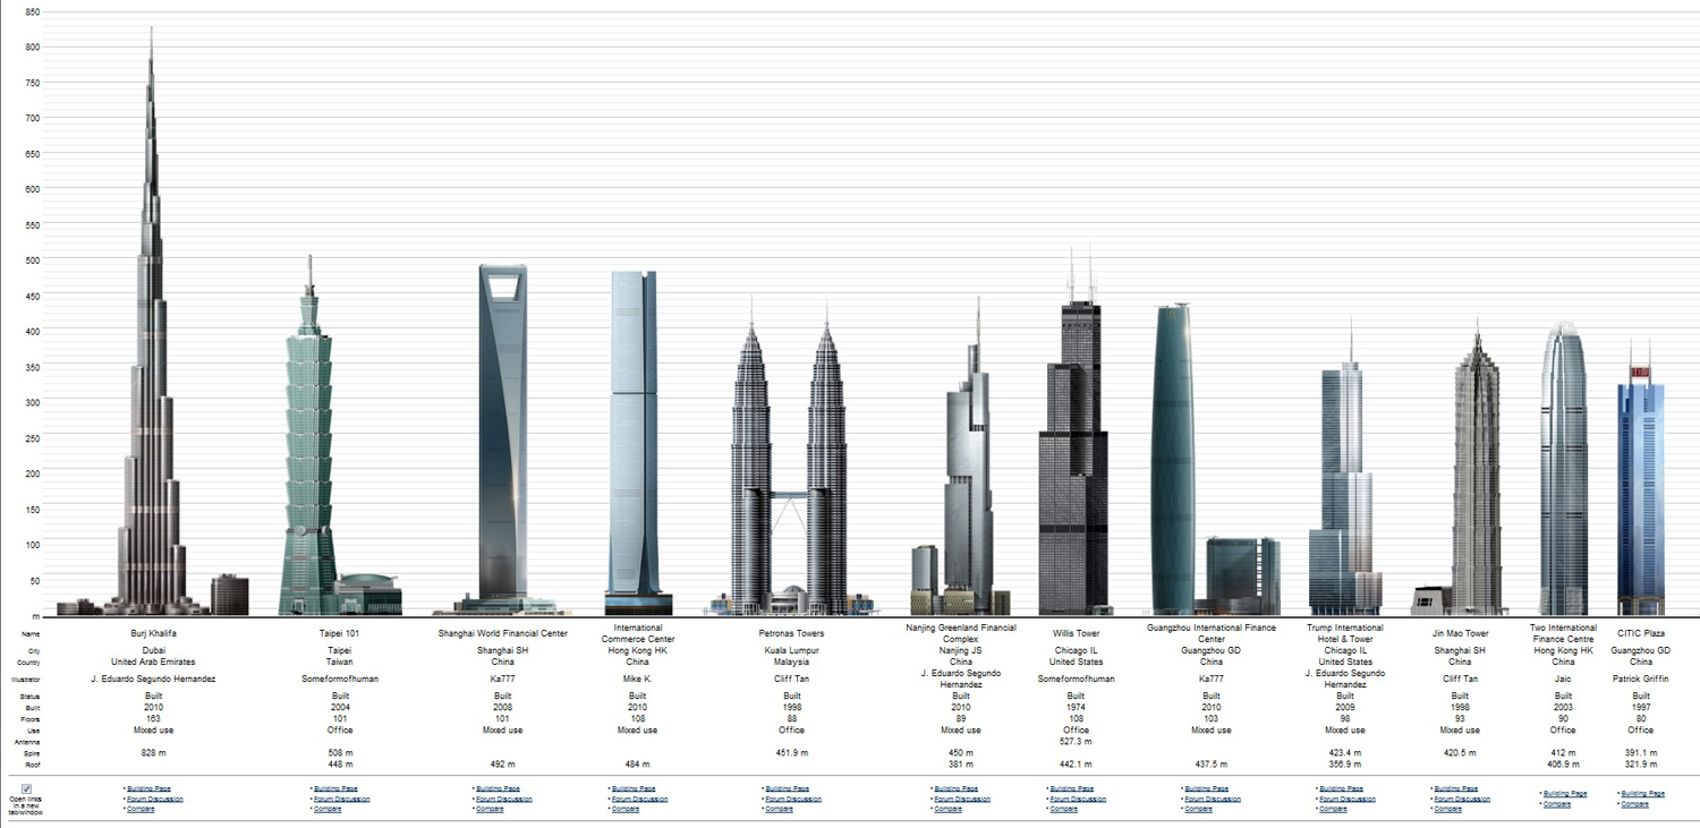 Fun Facts You Probably Didn't Know About Burj Khalifa